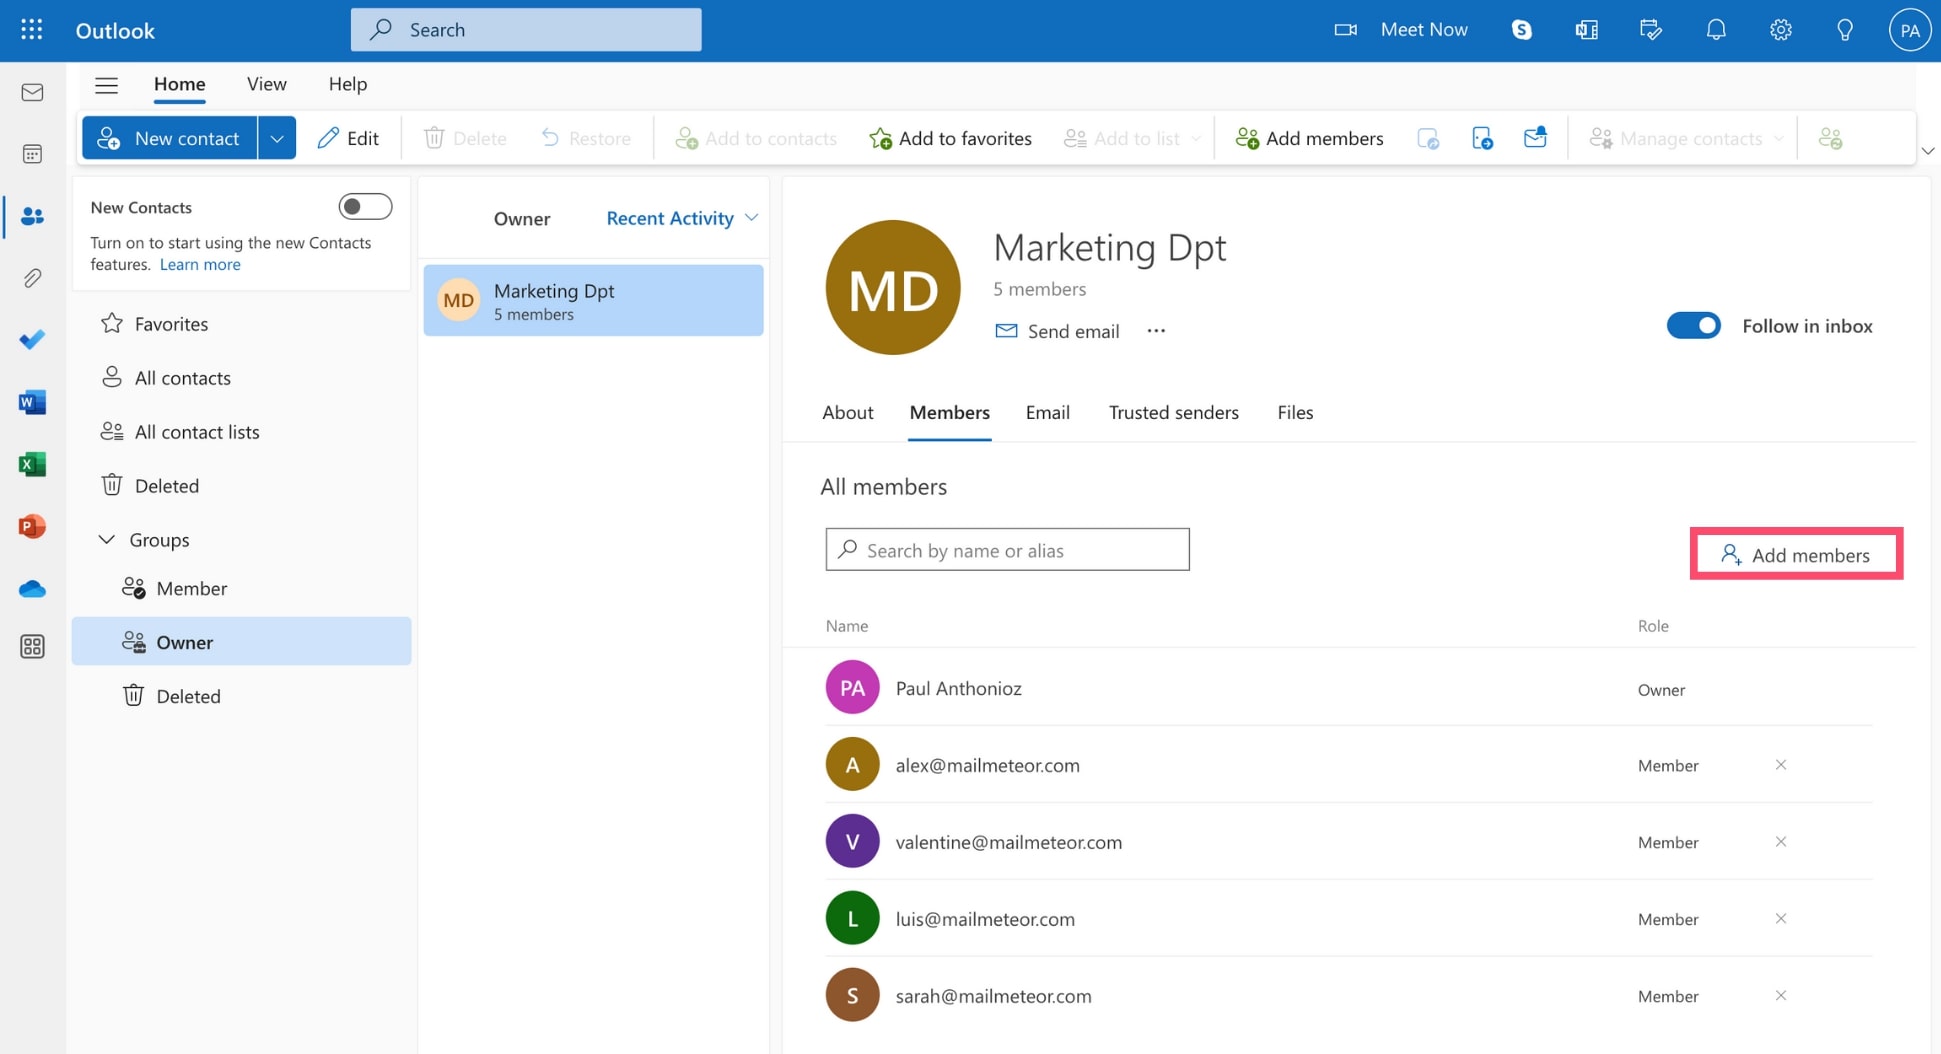 Add a new member to your contact group in Outlook